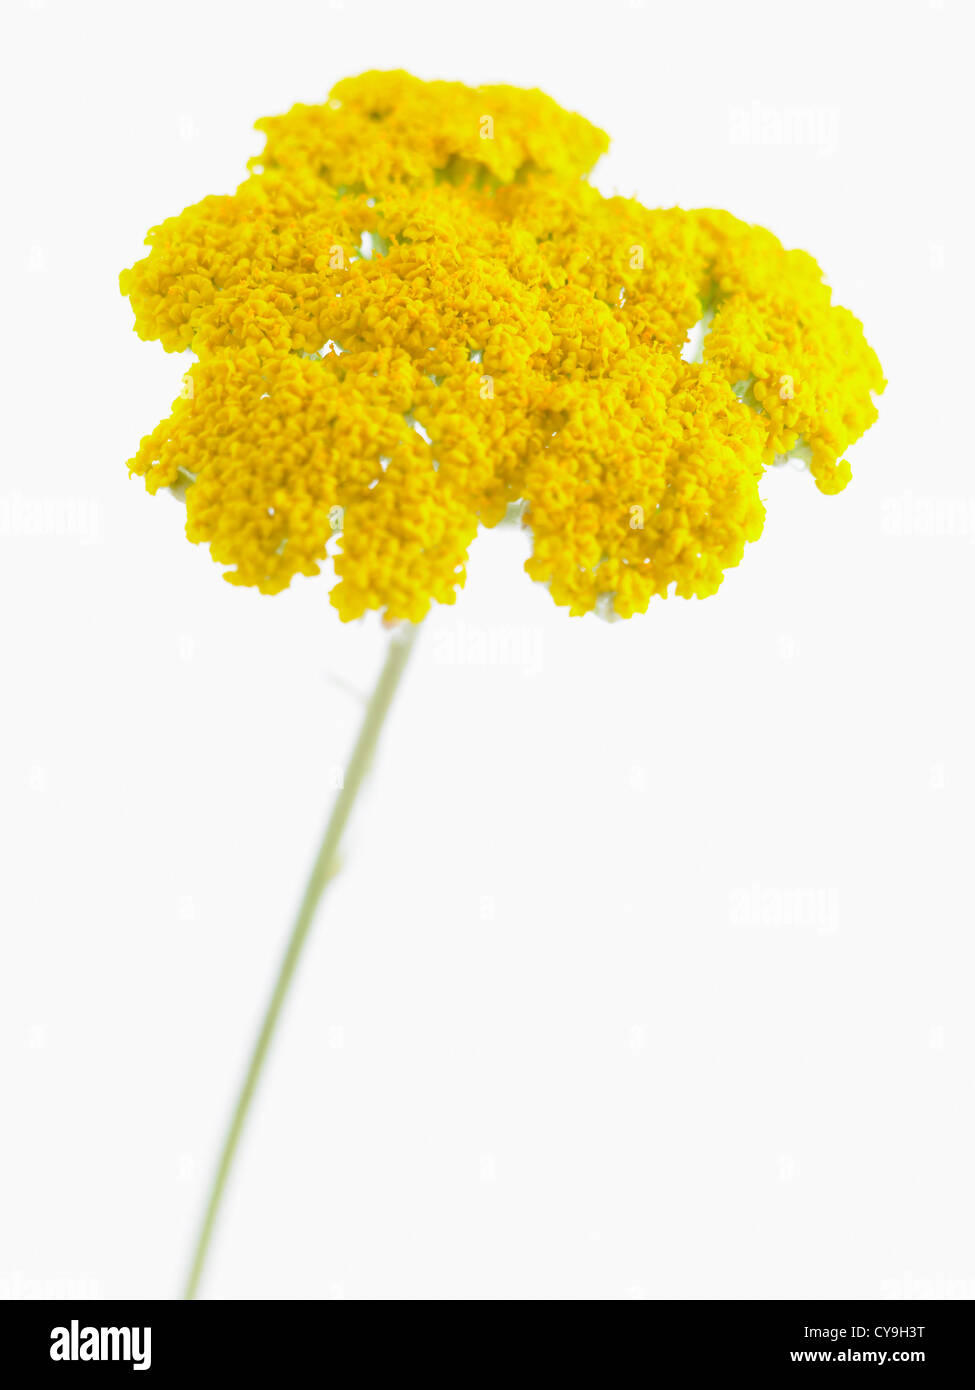 Achillea filipendulina 'Gold Plate', Yarrow. Yellow umbellifer shaped flower head on a single stem against a white background. Stock Photo